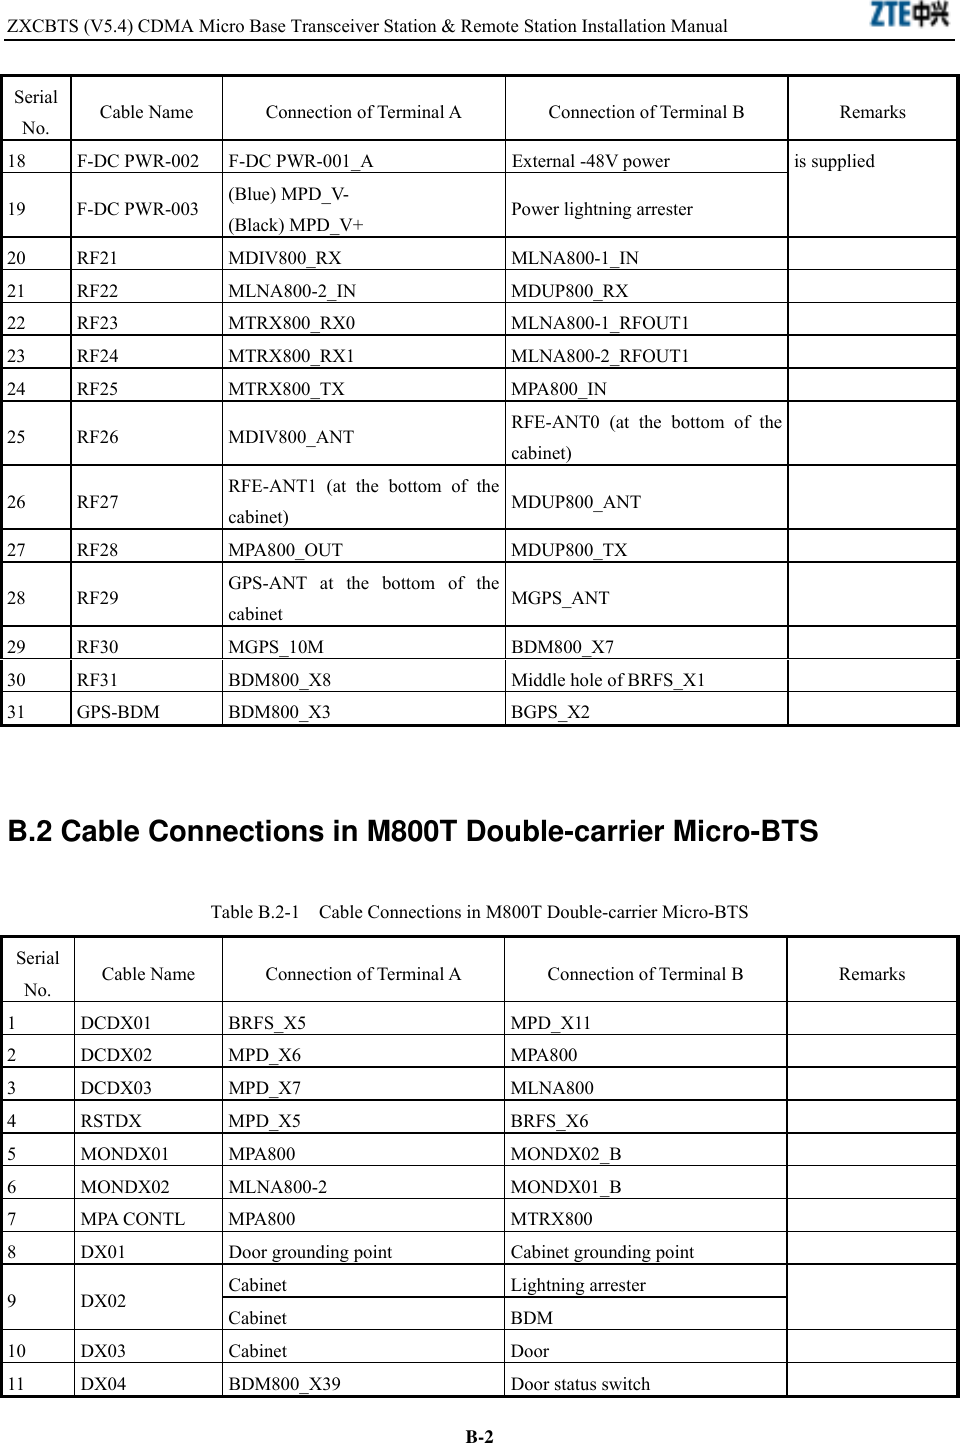 ZXCBTS (V5.4) CDMA Micro Base Transceiver Station &amp; Remote Station Installation Manual    B-2Serial No.  Cable Name  Connection of Terminal A  Connection of Terminal B  Remarks 18  F-DC PWR-002  F-DC PWR-001_A  External -48V power 19 F-DC PWR-003 (Blue) MPD_V- (Black) MPD_V+  Power lightning arrester is supplied 20 RF21  MDIV800_RX  MLNA800-1_IN   21 RF22  MLNA800-2_IN  MDUP800_RX   22 RF23  MTRX800_RX0  MLNA800-1_RFOUT1   23 RF24  MTRX800_RX1  MLNA800-2_RFOUT1   24 RF25  MTRX800_TX  MPA800_IN   25 RF26  MDIV800_ANT  RFE-ANT0 (at the bottom of the cabinet)   26 RF27  RFE-ANT1 (at the bottom of the cabinet)  MDUP800_ANT  27 RF28  MPA800_OUT  MDUP800_TX   28 RF29  GPS-ANT at the bottom of the cabinet  MGPS_ANT  29 RF30  MGPS_10M  BDM800_X7   30  RF31  BDM800_X8  Middle hole of BRFS_X1   31 GPS-BDM  BDM800_X3  BGPS_X2    B.2 Cable Connections in M800T Double-carrier Micro-BTS Table B.2-1    Cable Connections in M800T Double-carrier Micro-BTS Serial No.  Cable Name  Connection of Terminal A  Connection of Terminal B  Remarks 1 DCDX01  BRFS_X5  MPD_X11   2 DCDX02  MPD_X6  MPA800   3 DCDX03  MPD_X7  MLNA800   4 RSTDX  MPD_X5  BRFS_X6   5 MONDX01 MPA800  MONDX02_B   6 MONDX02 MLNA800-2  MONDX01_B   7 MPA CONTL MPA800  MTRX800   8  DX01  Door grounding point  Cabinet grounding point   Cabinet Lightning arrester  9 DX02 Cabinet BDM  10 DX03  Cabinet  Door   11  DX04  BDM800_X39  Door status switch   